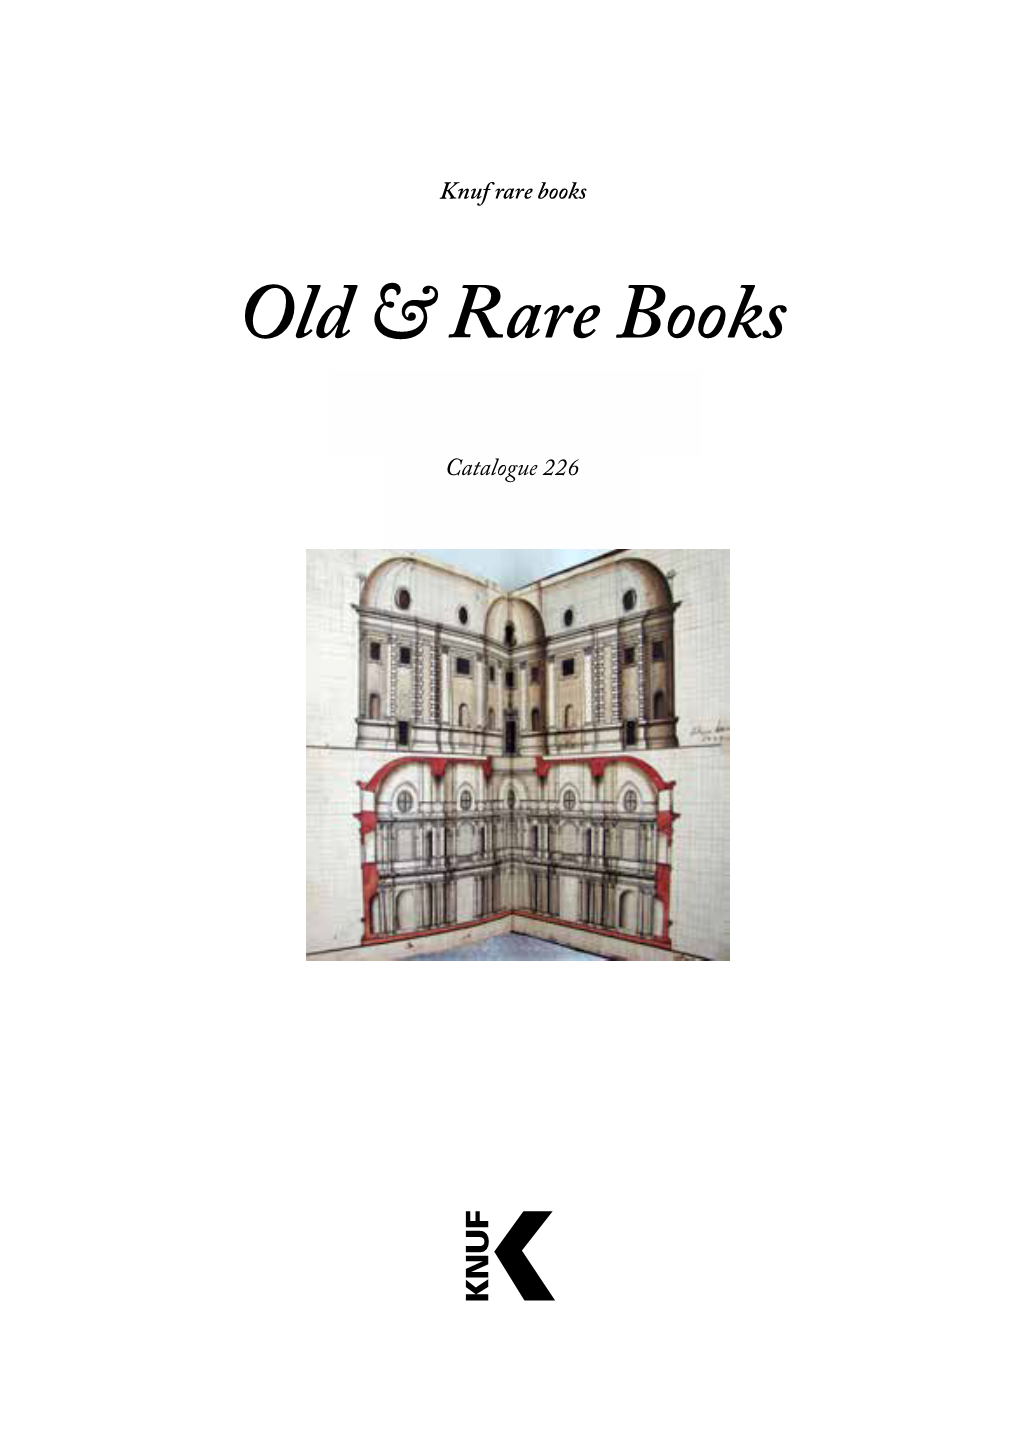 Old & Rare Books About Books